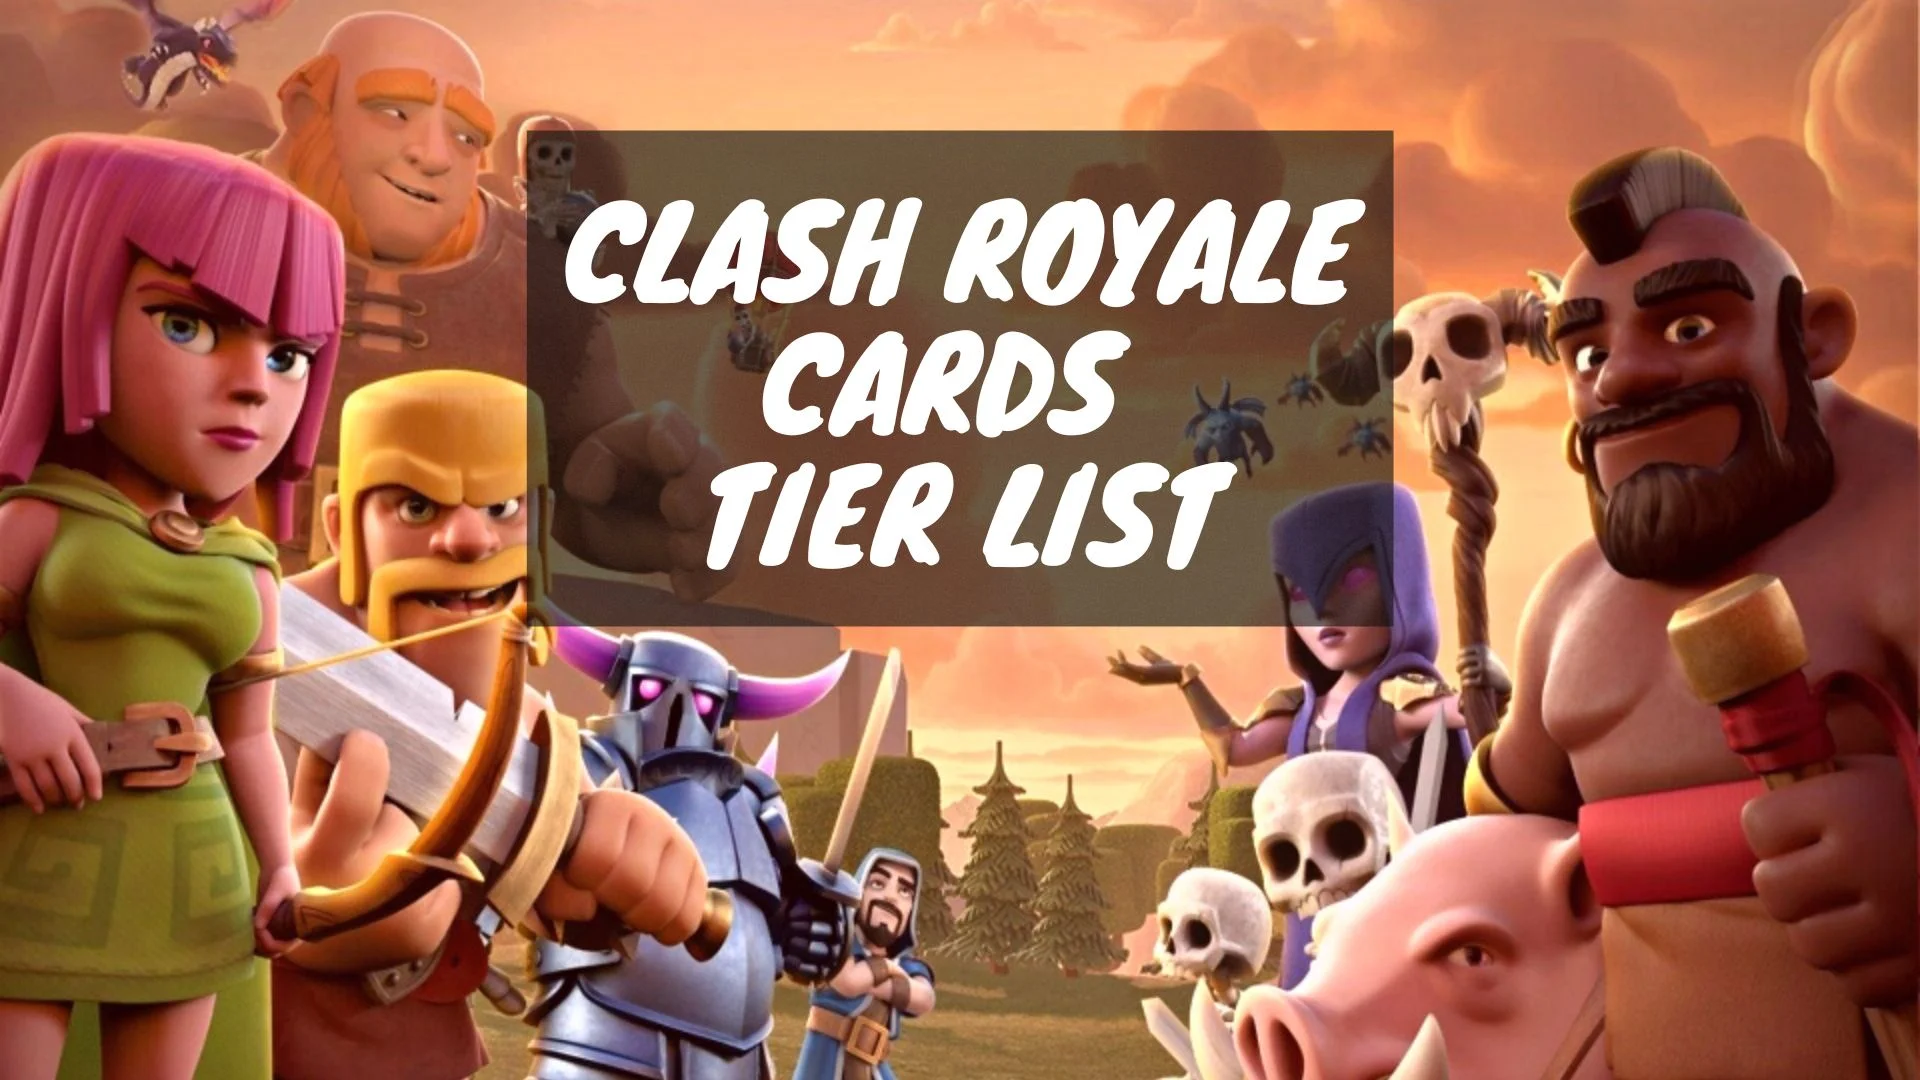 Clash Royale Barrel O' Fun event: Best deck, strategy, and more